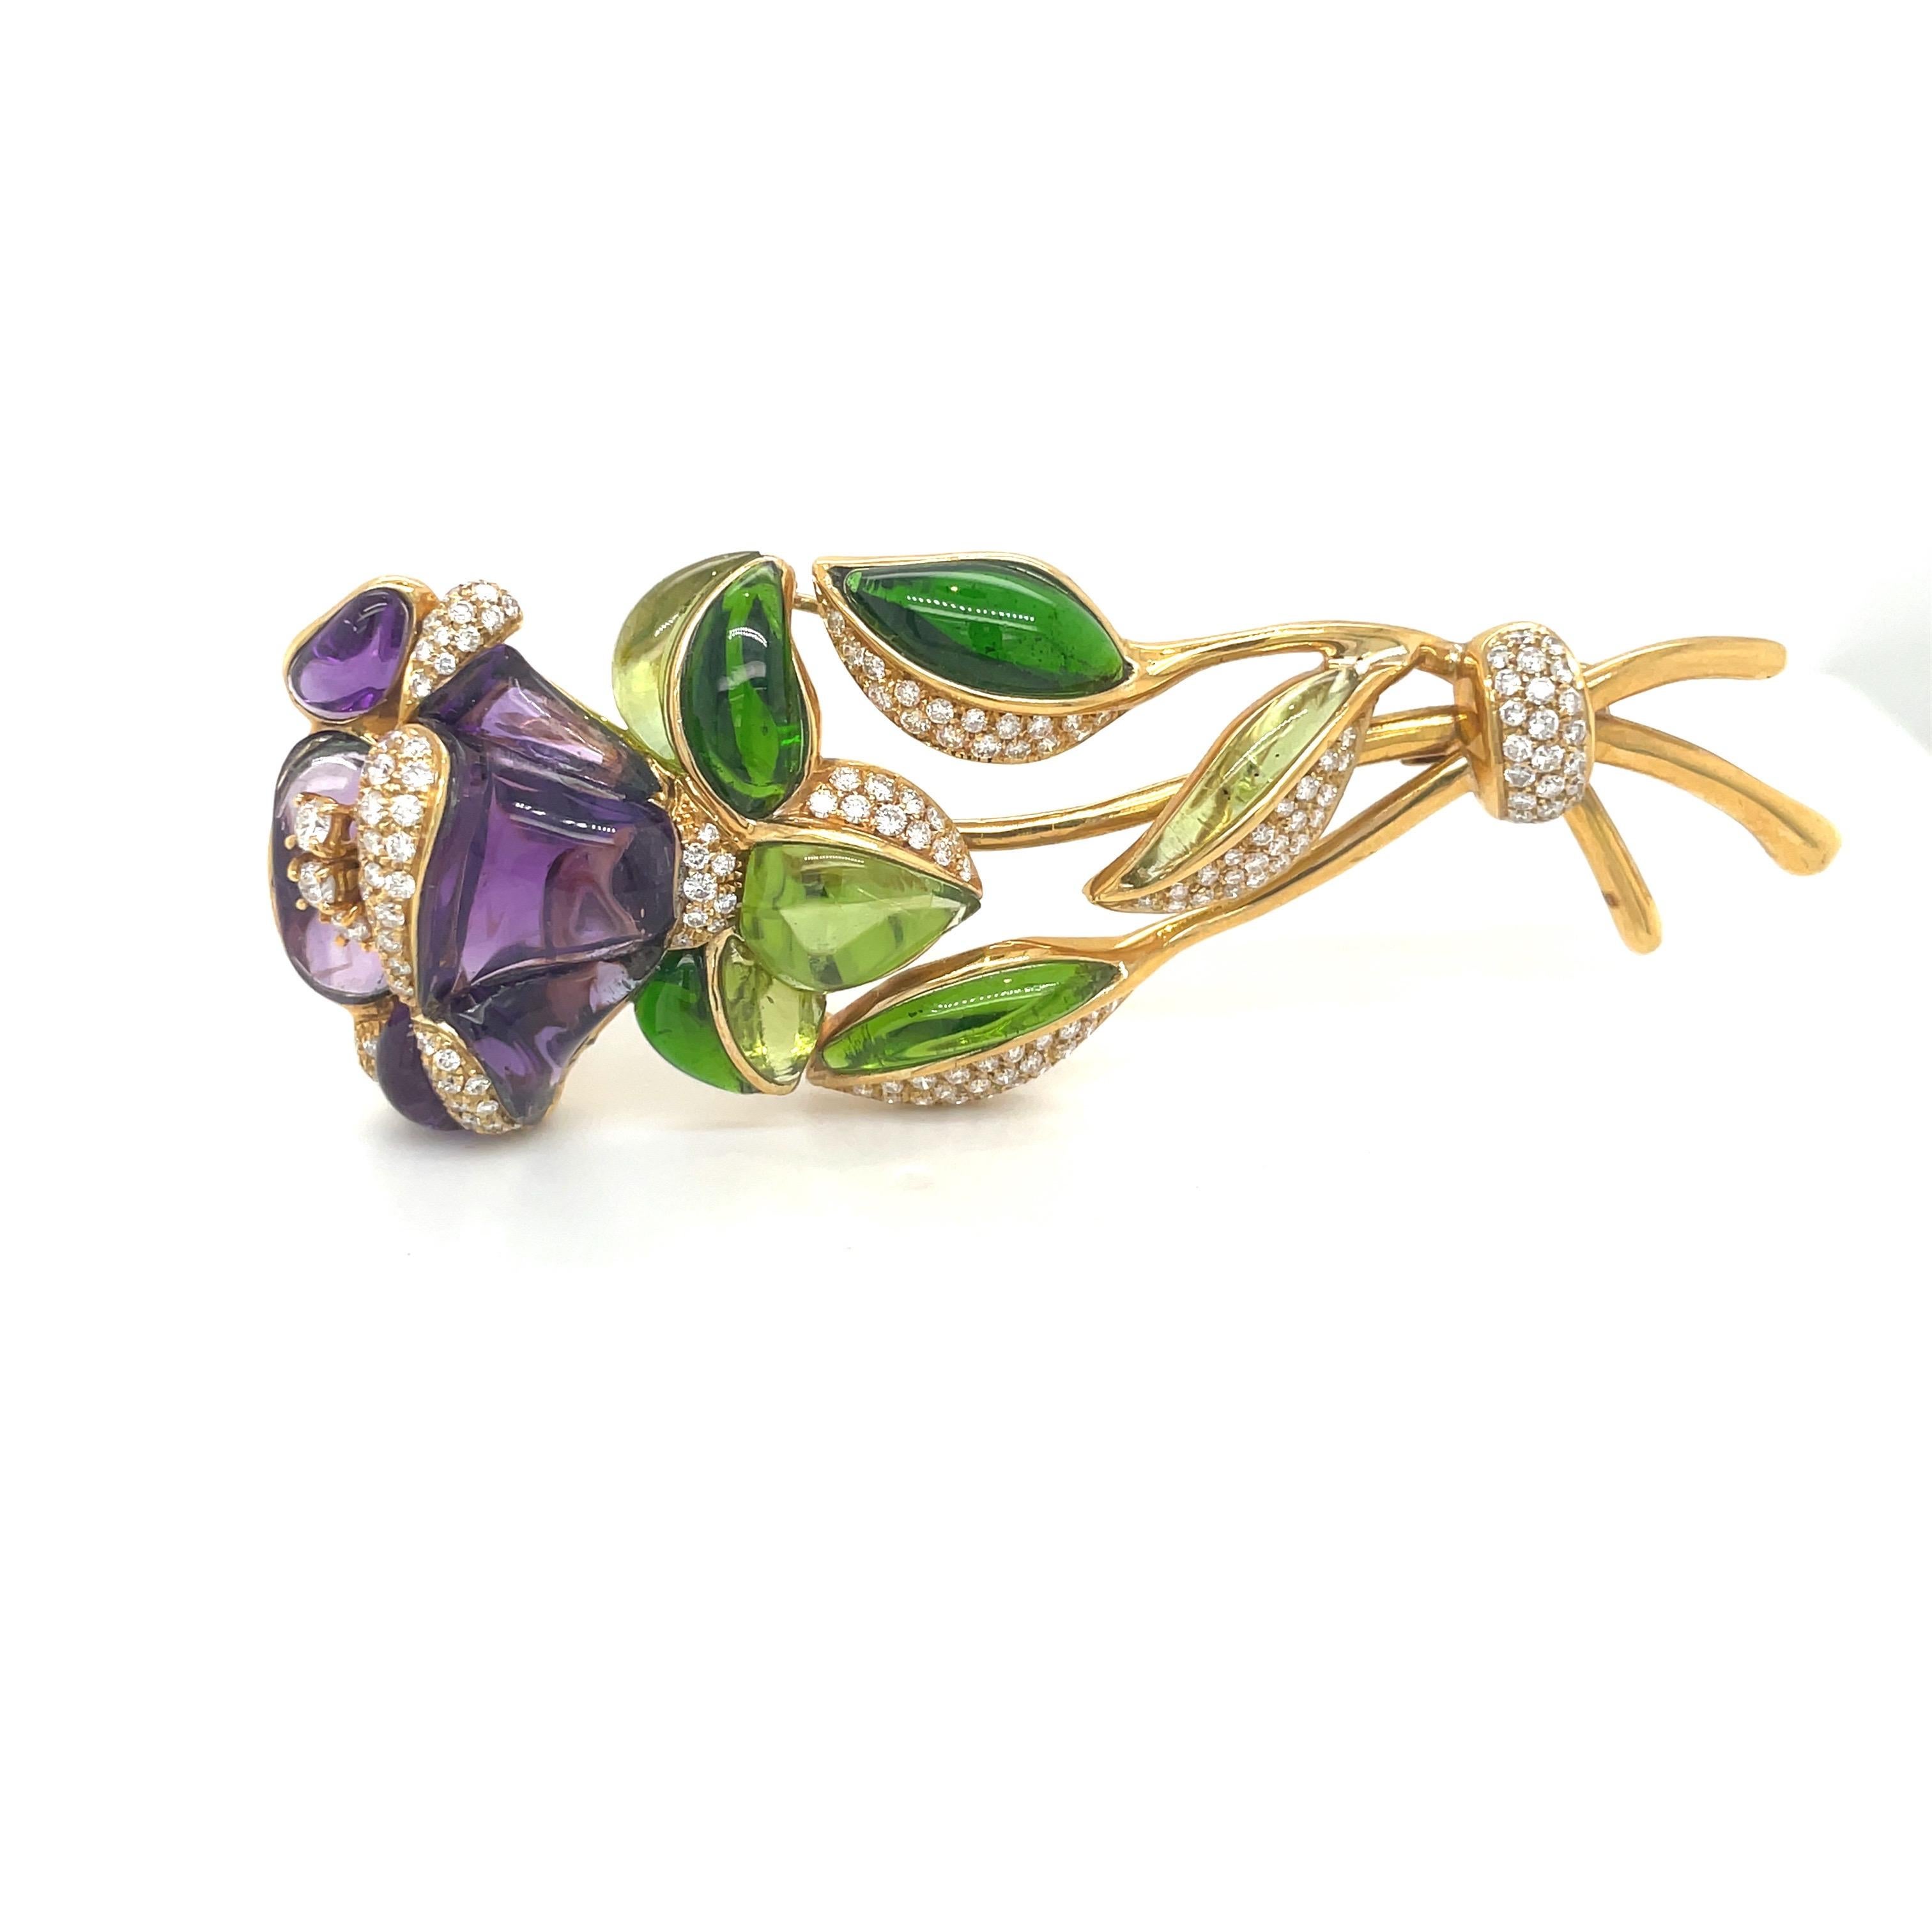 This intricate 18 karat yellow gold flower brooch was made exclusively for Cellini in Italy by Roberto Casarin. The petals are beautifully set with pave diamonds and hand carved and polished amethyst. The flower is further detailed with the bud,